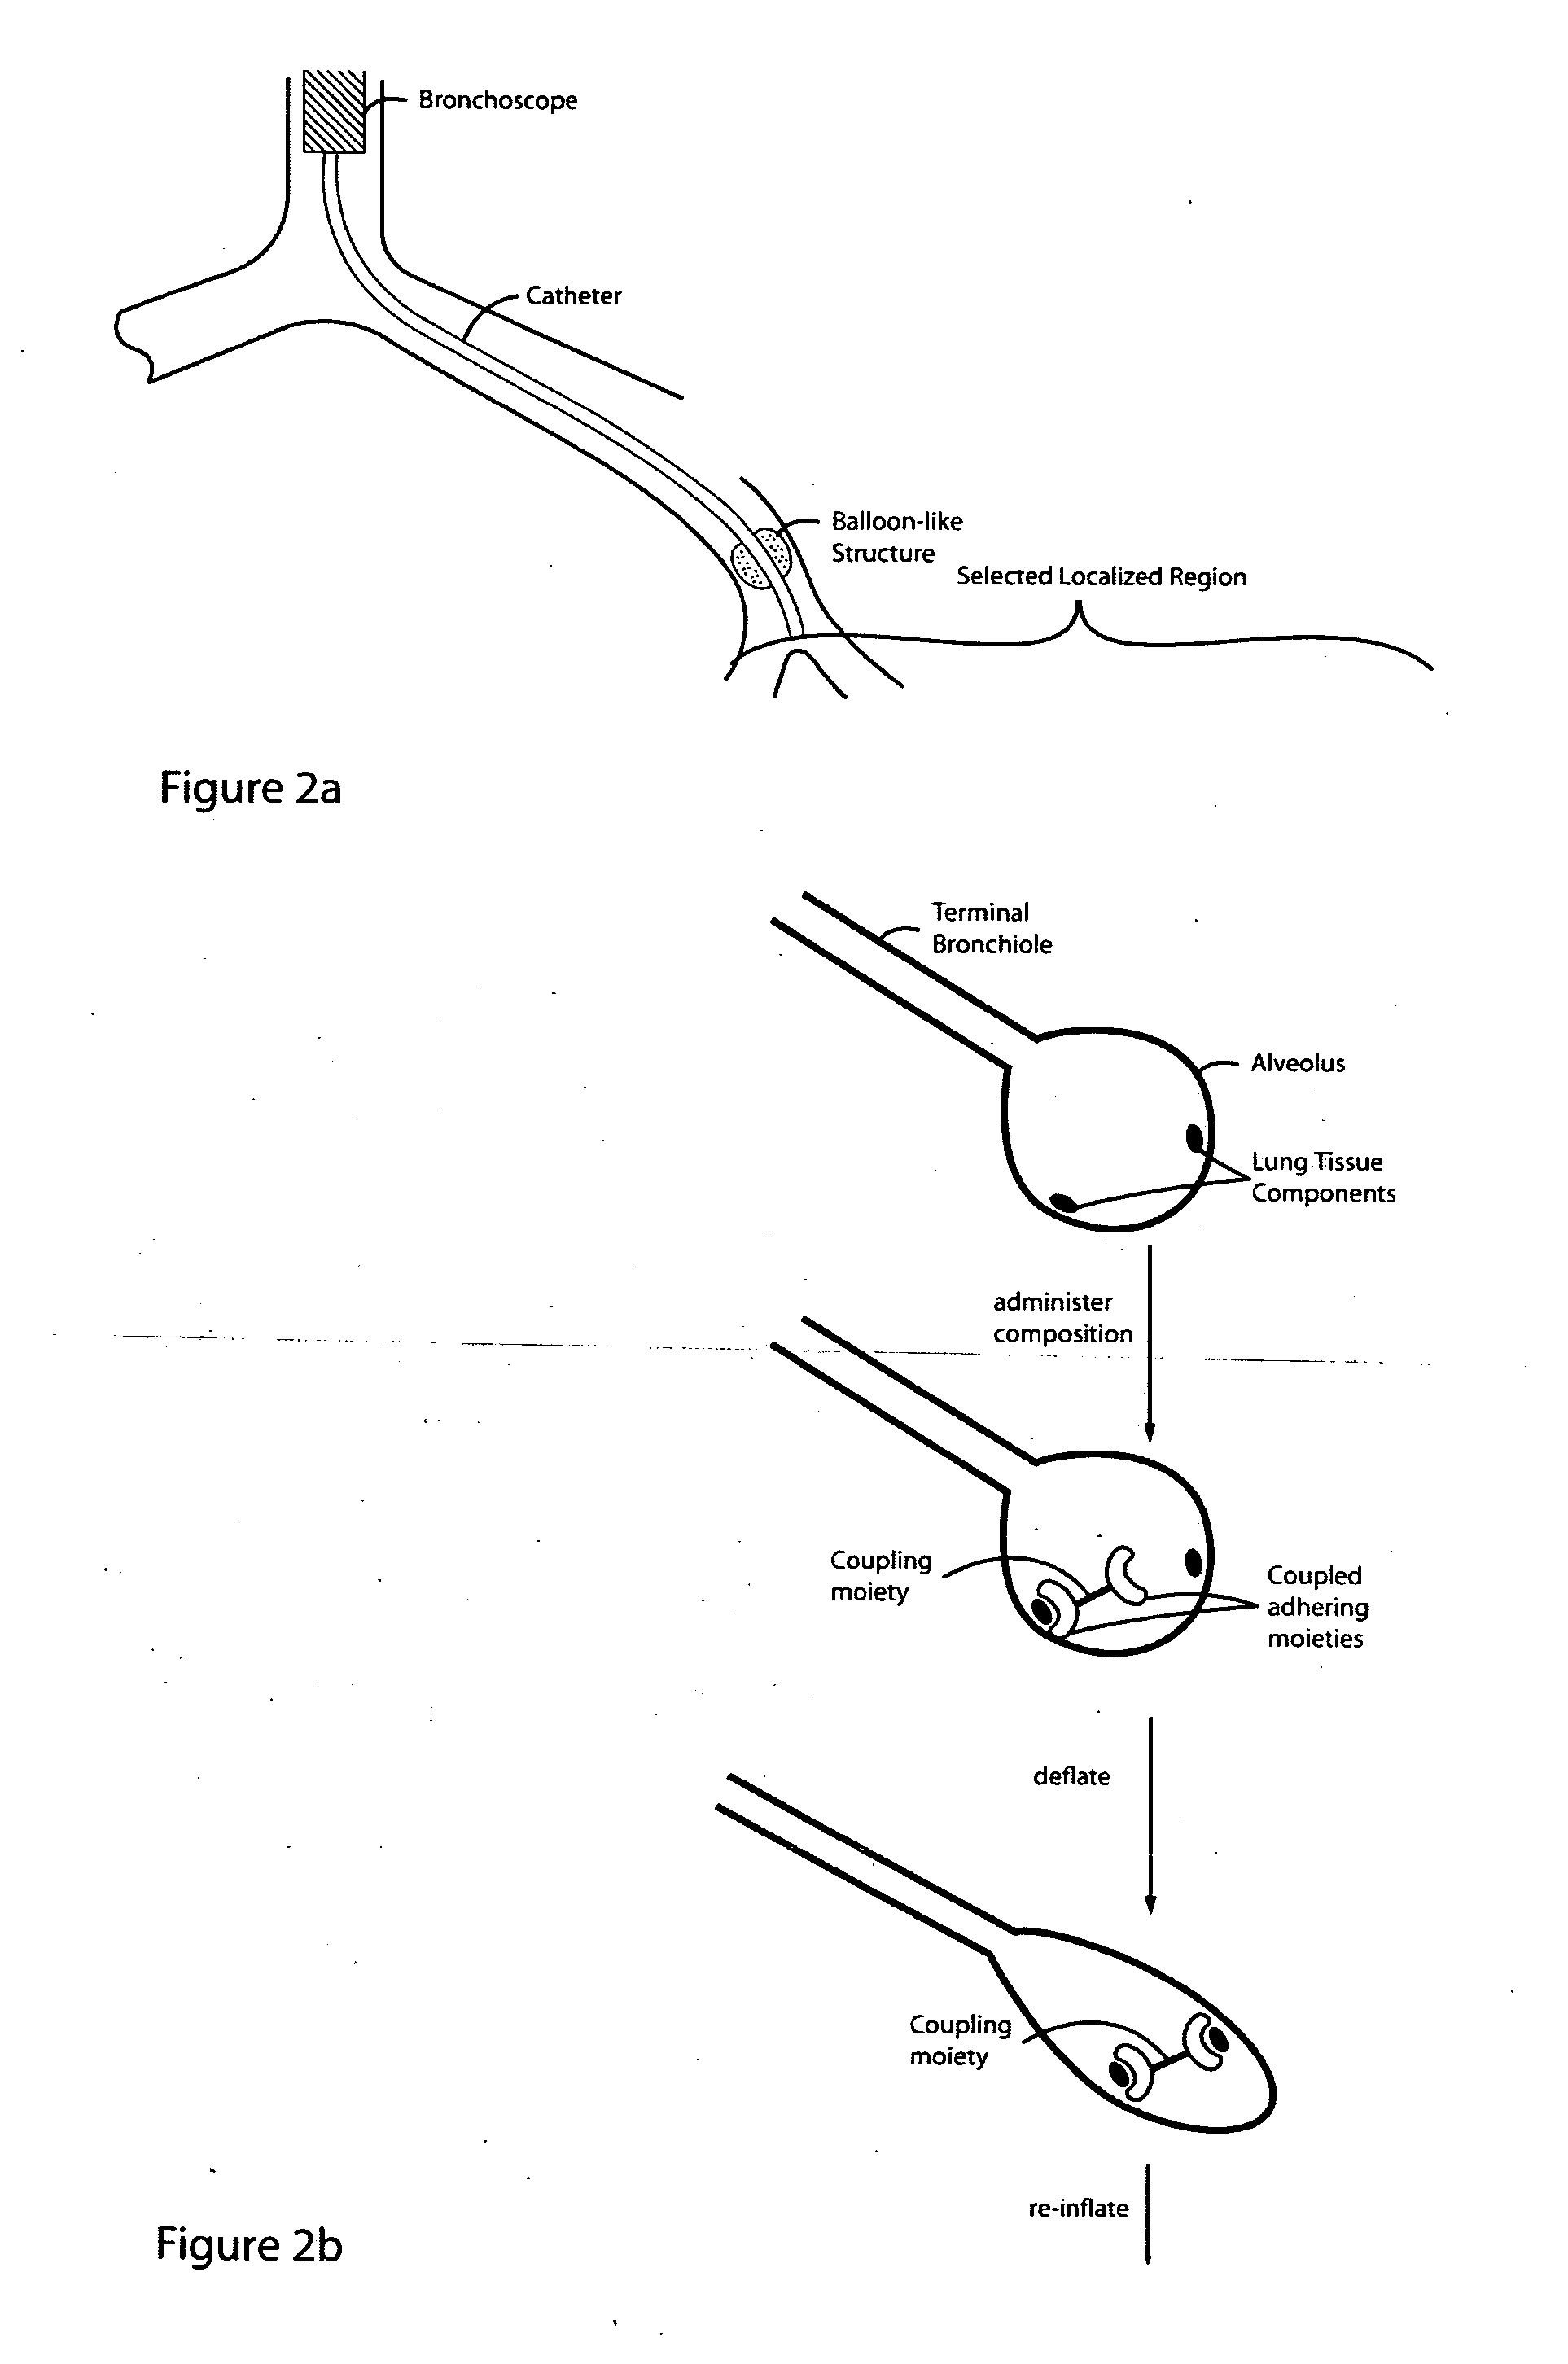 Lung volume reduction using glue compositions